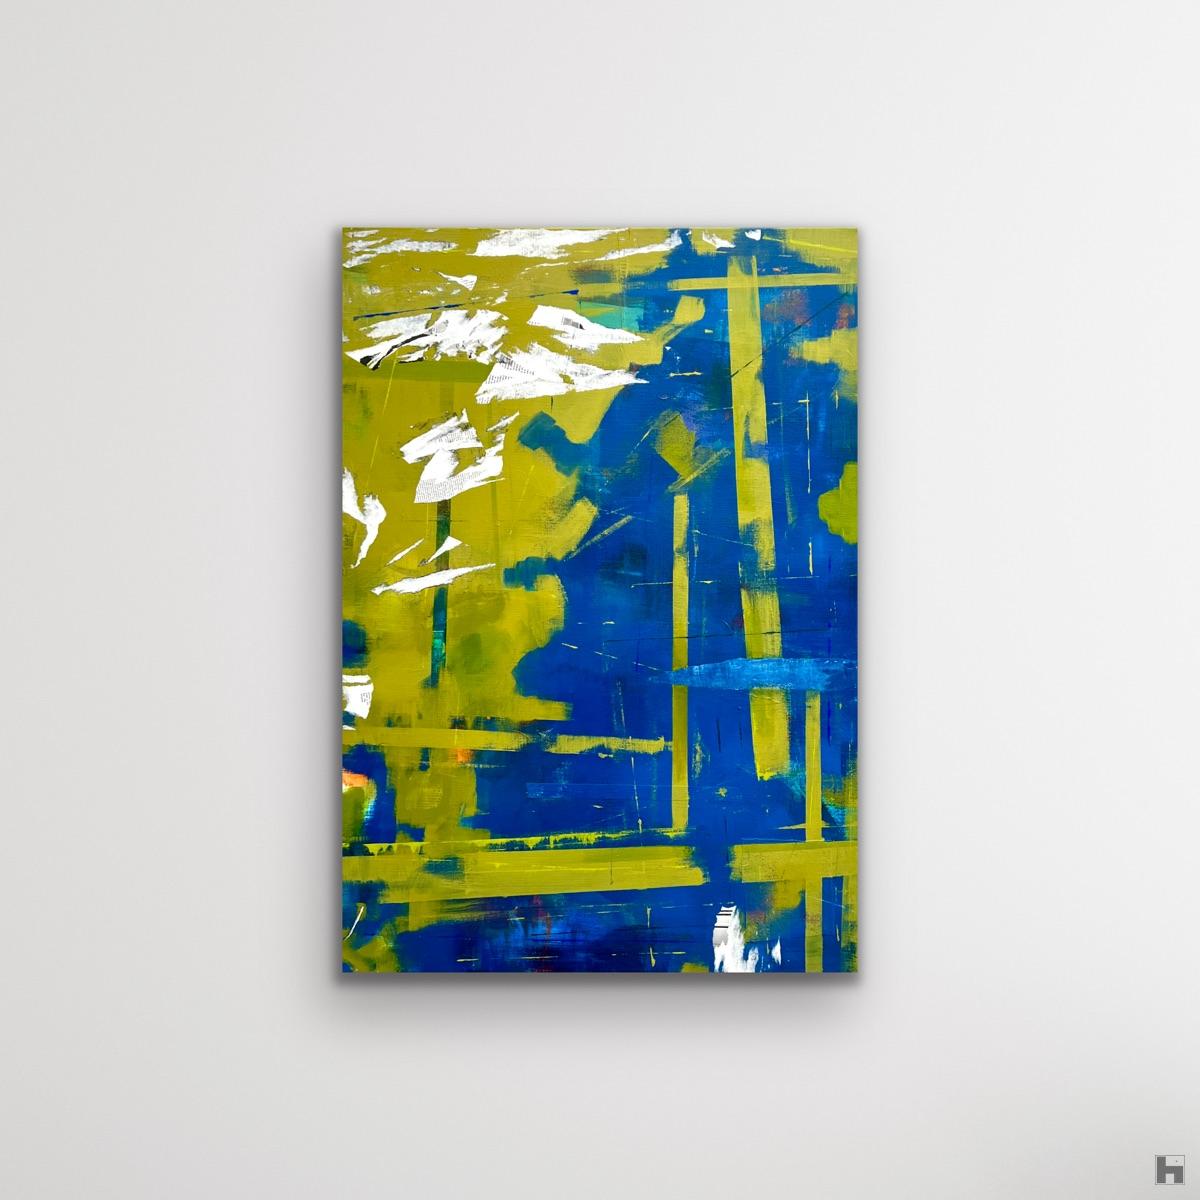 A blue abstract painting on a white background